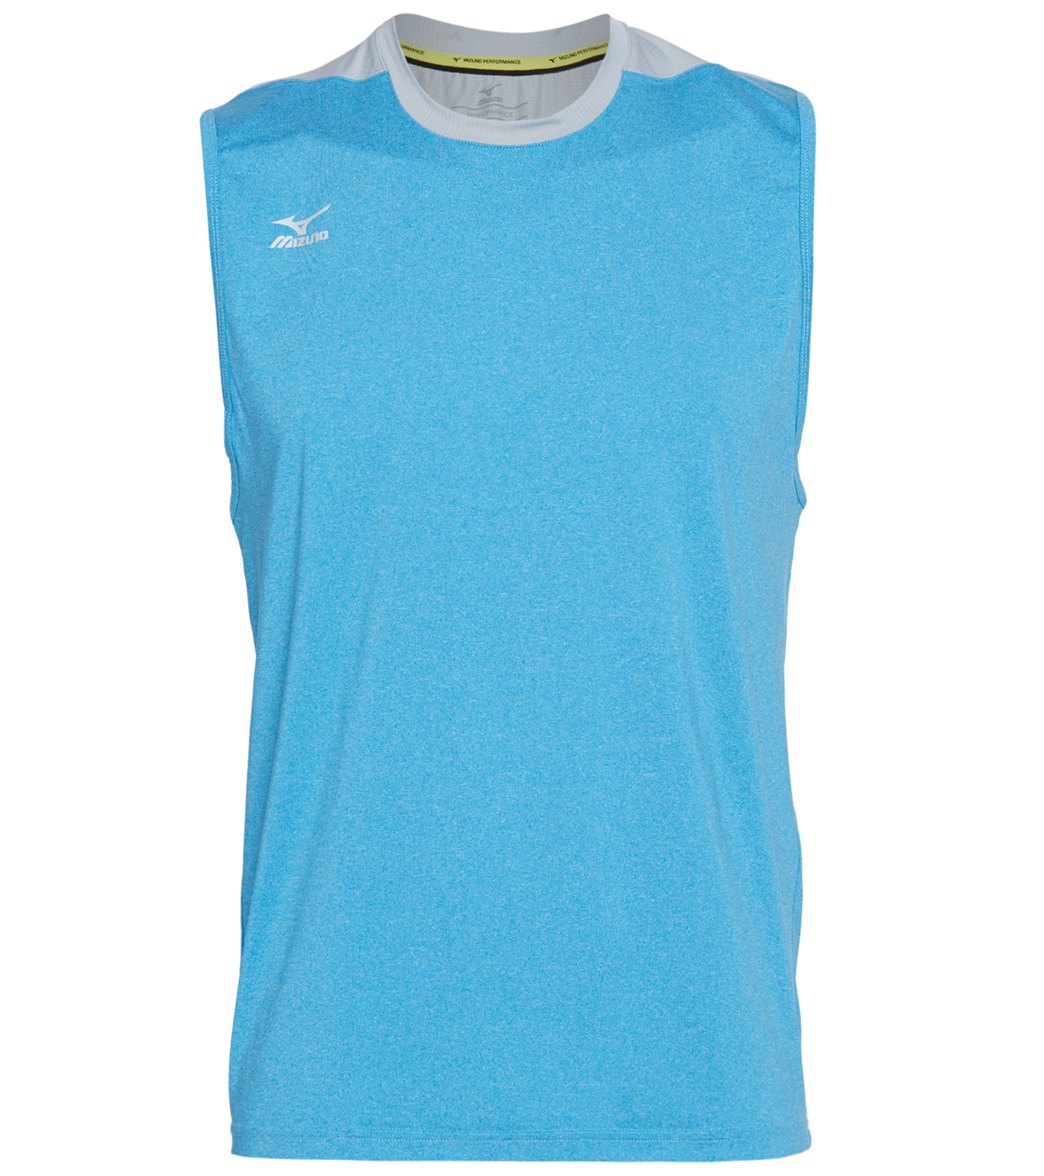 Mizuno Men's Cutoff Volleyball Jersey Shirt - Heathered Dude Blue/Silver Large Polyester/Spandex - Swimoutlet.com